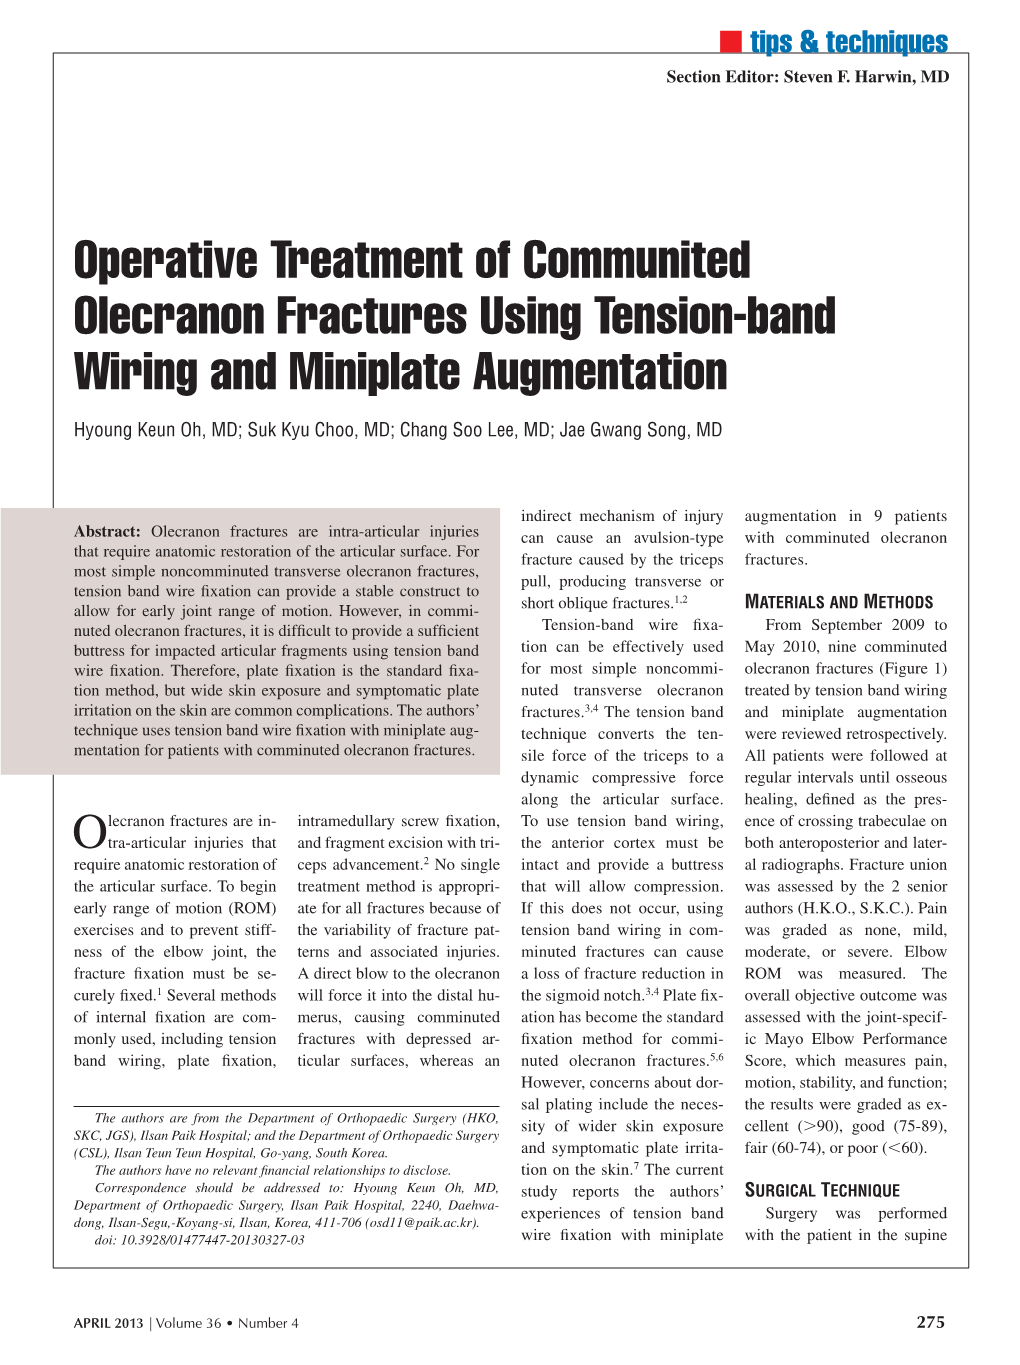 Operative Treatment of Communited Olecranon Fractures Using Tension-Band Wiring and Miniplate Augmentation